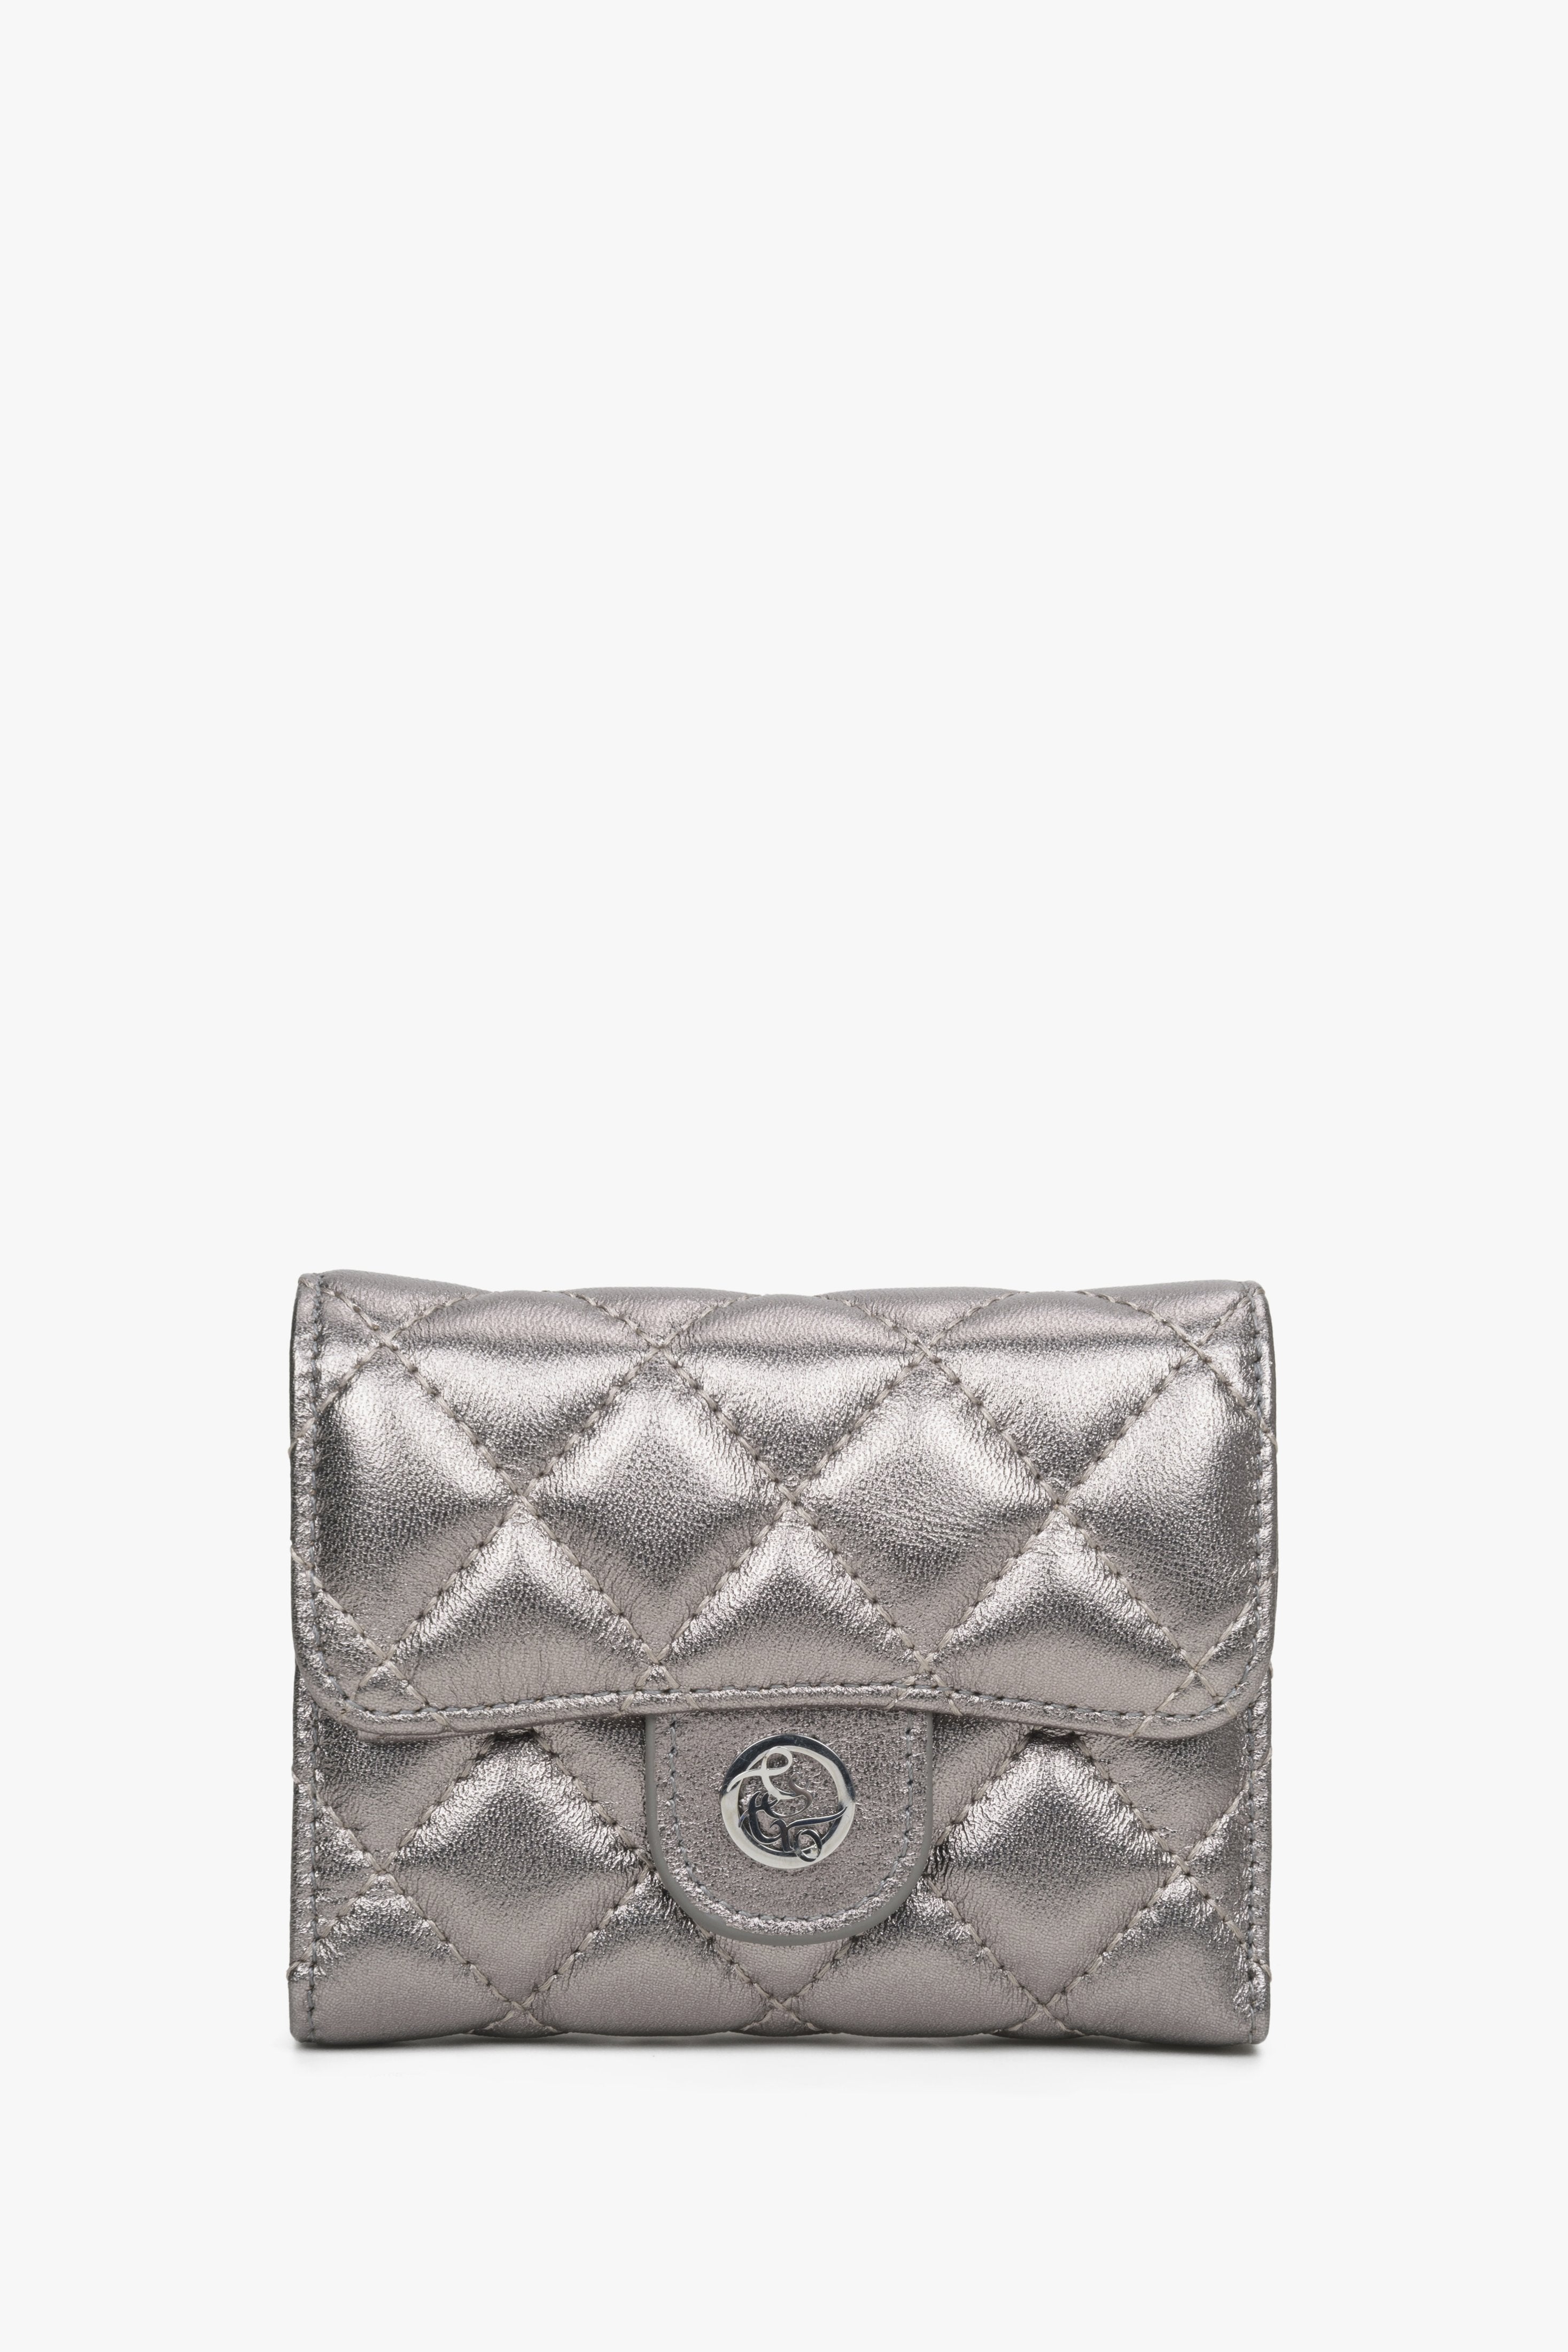 Women's Tri-Fold Small Silver Wallet with Decorative Embossing Estro ER00114476.